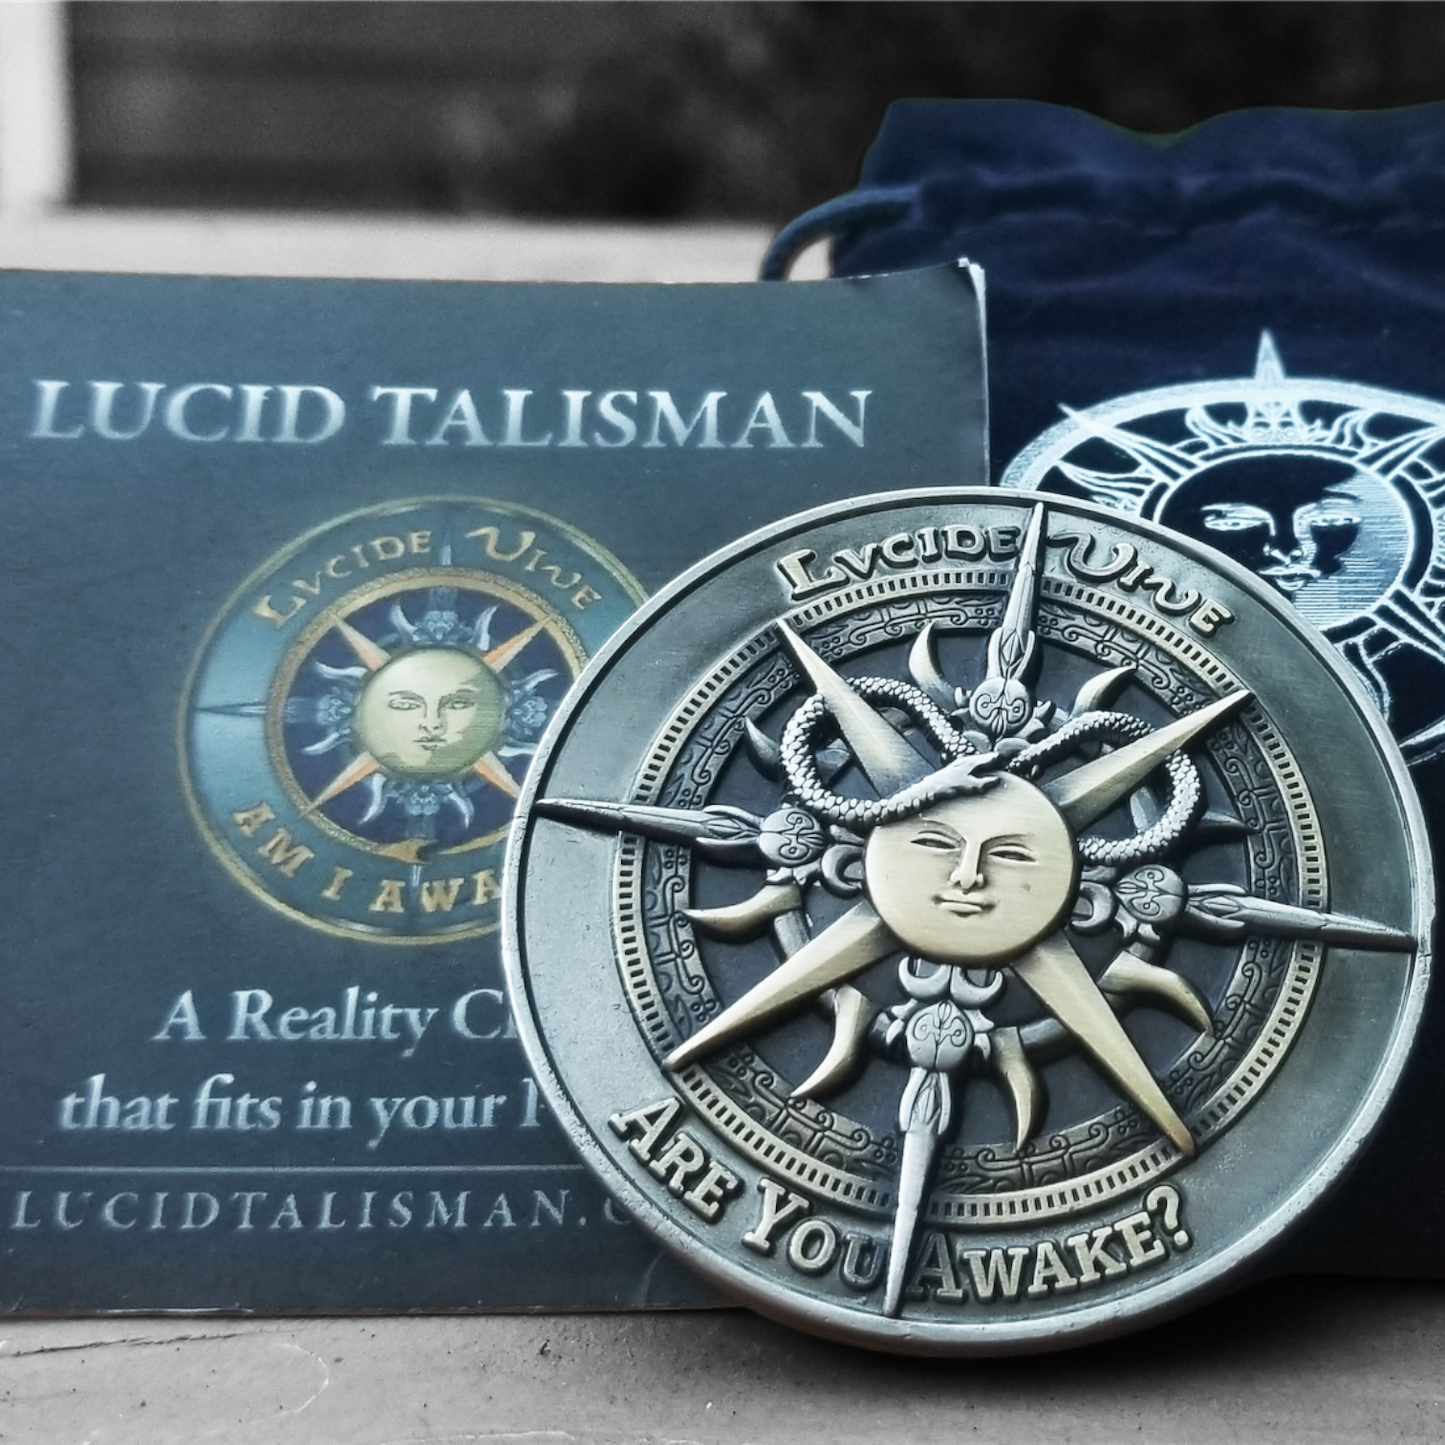 Lucid Talisman - The Relic